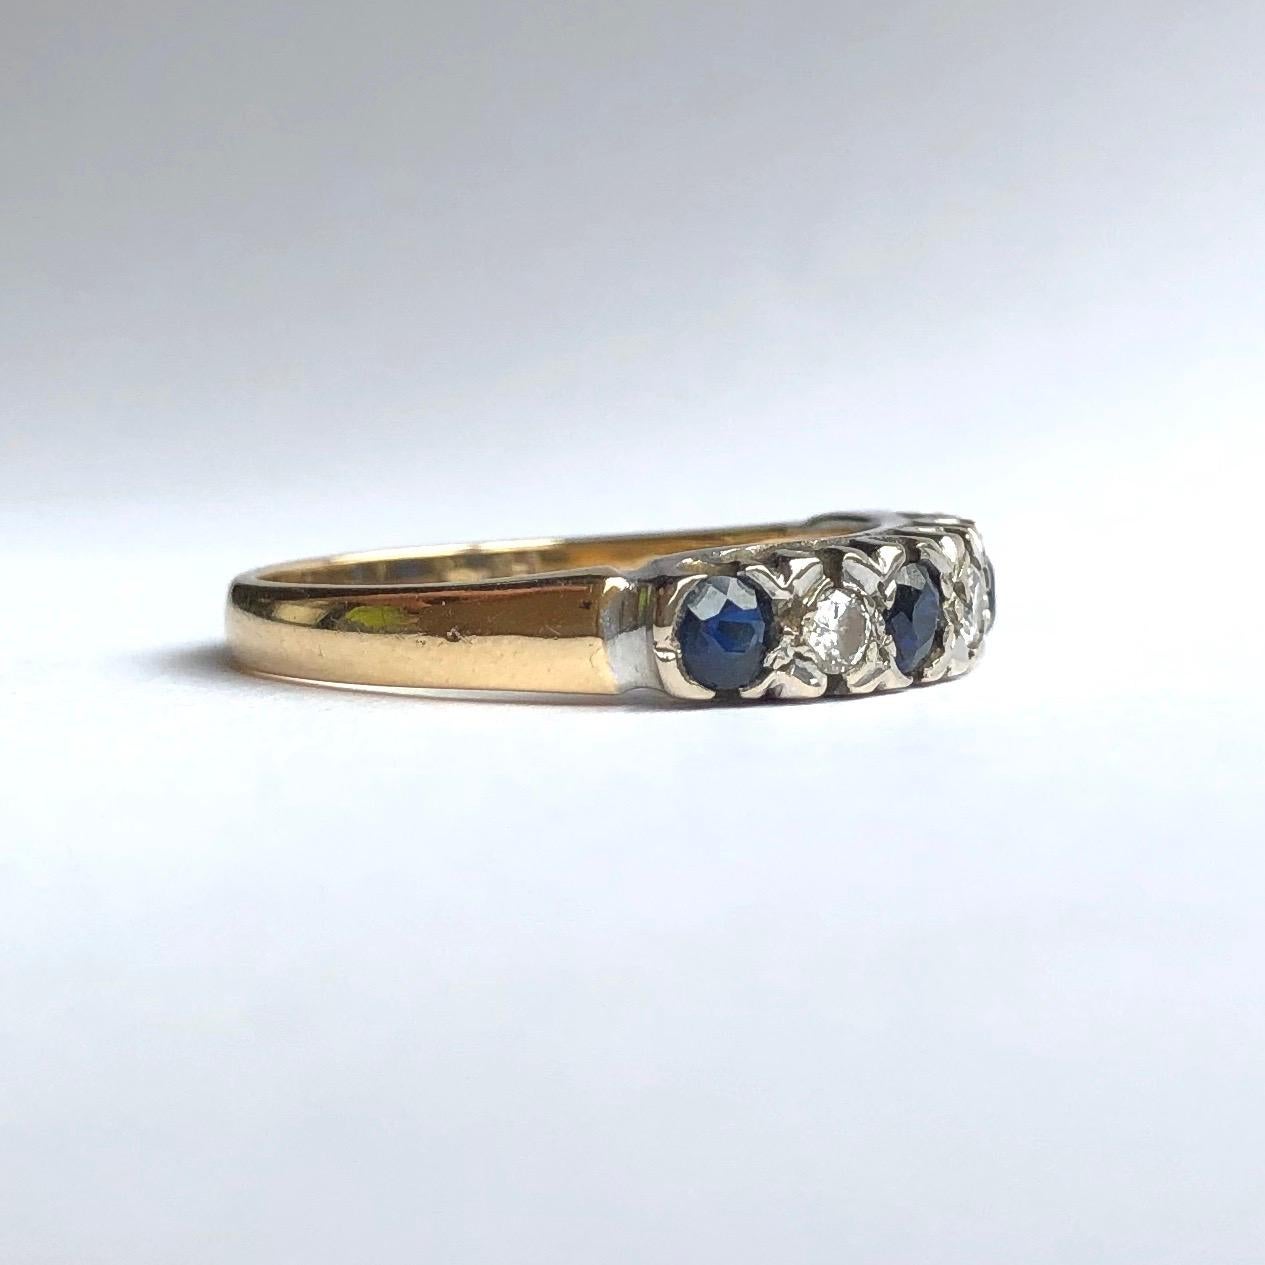 Set within platinum are four bright blue and gorgeous sapphires totalling approx 60pts. Also sat beside the sapphires are three bright diamonds. These total approx 30pts. The rest of the ring is modelled in 18ct gold and is made in London, England.